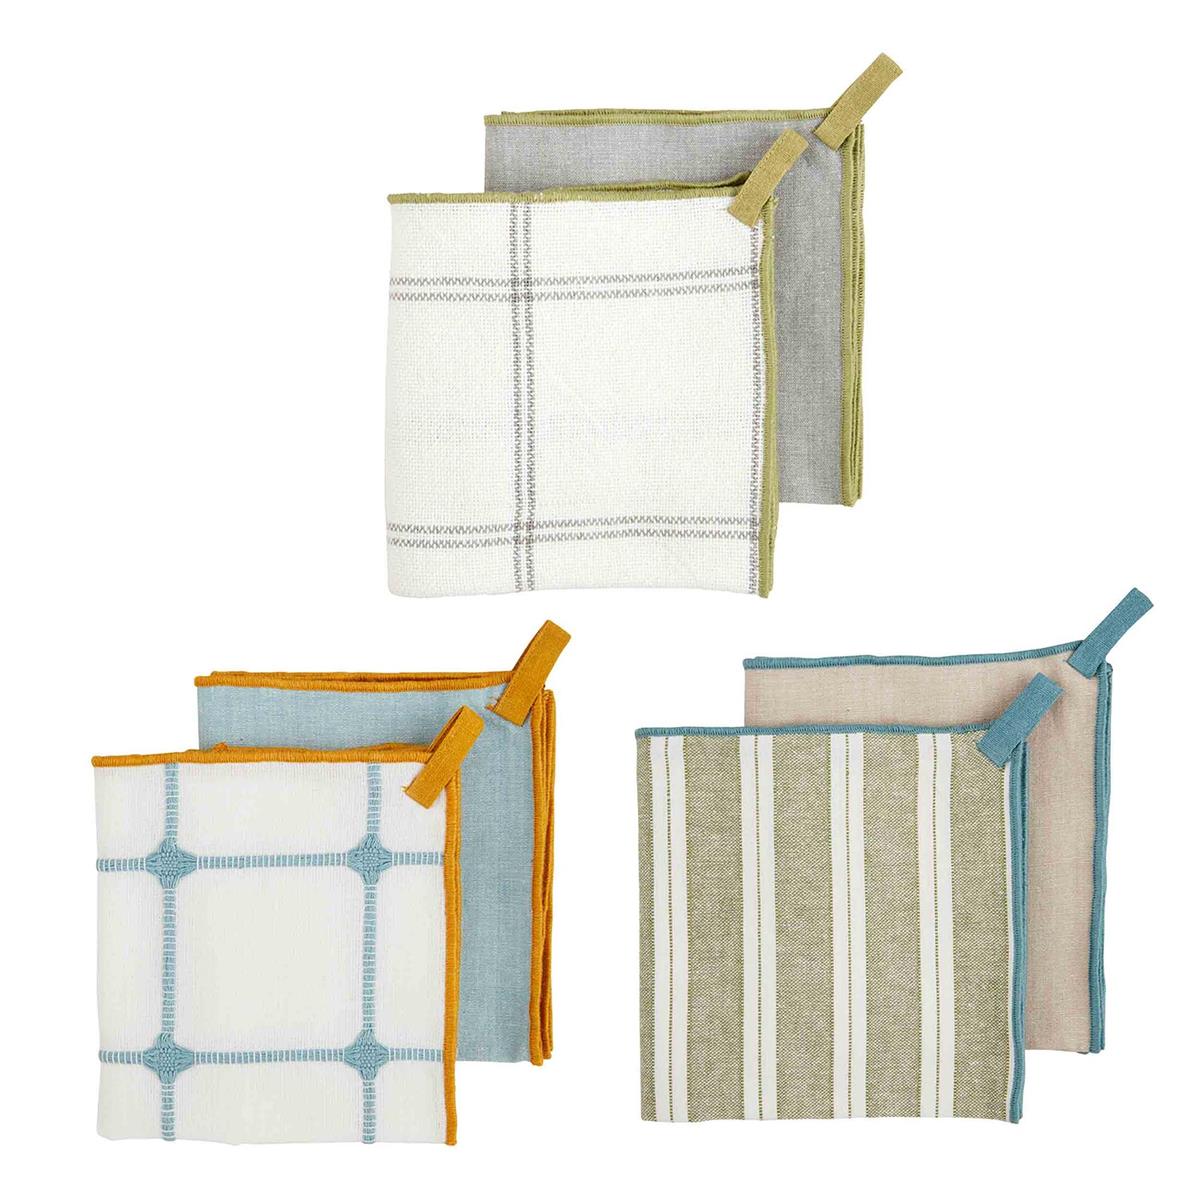 all three patterned sets of stitch edge towels displayed against a white background